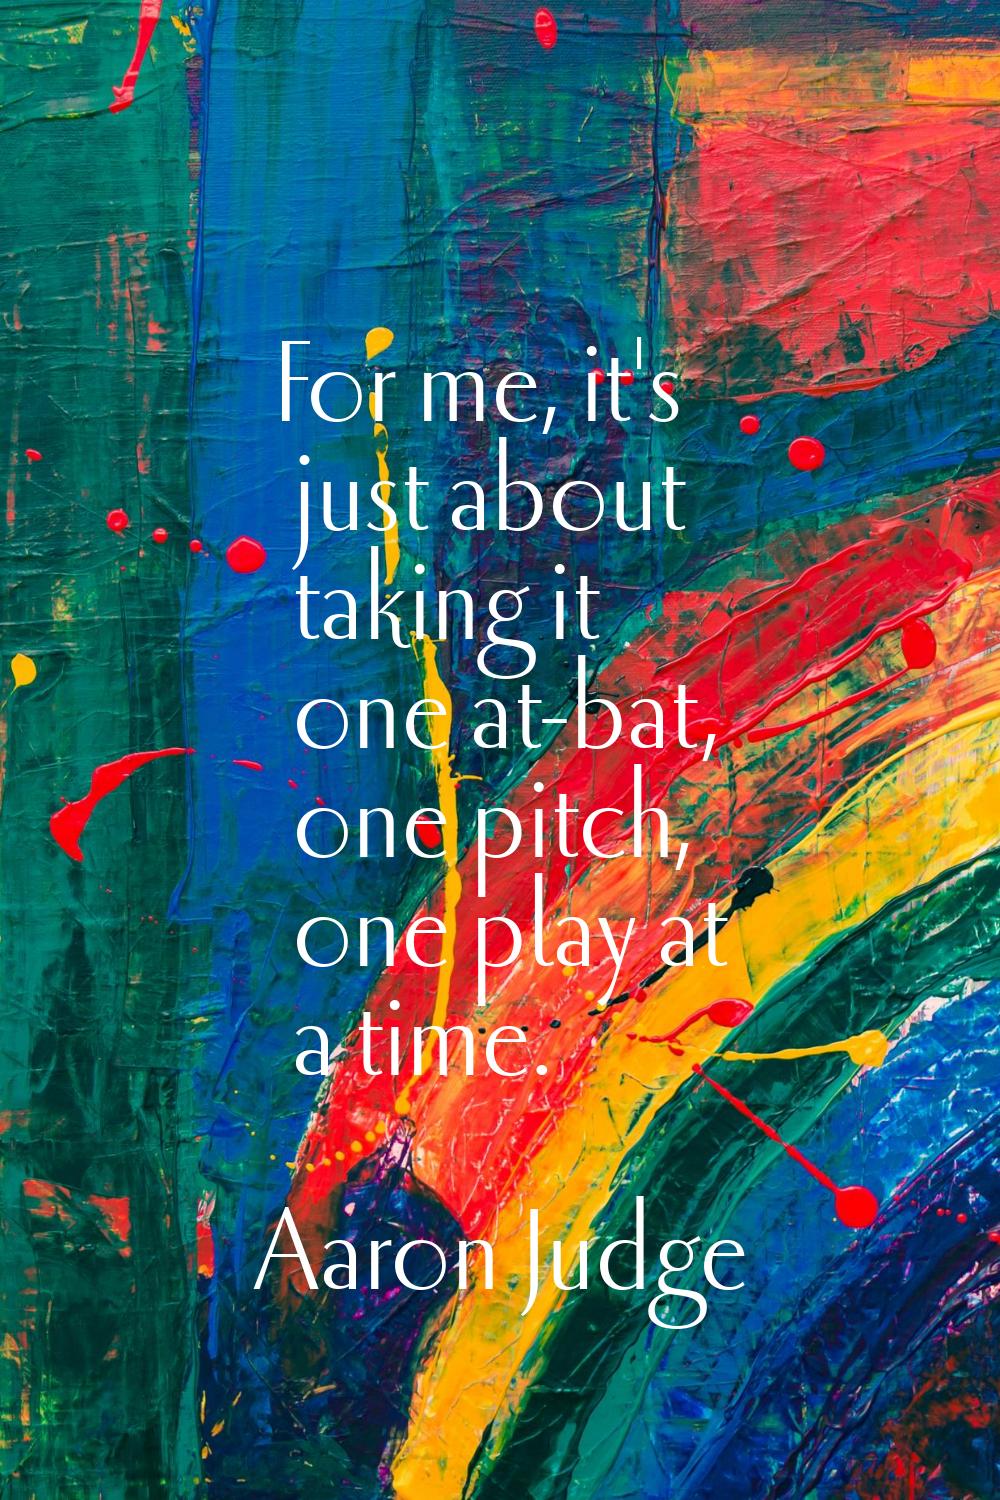 For me, it's just about taking it one at-bat, one pitch, one play at a time.